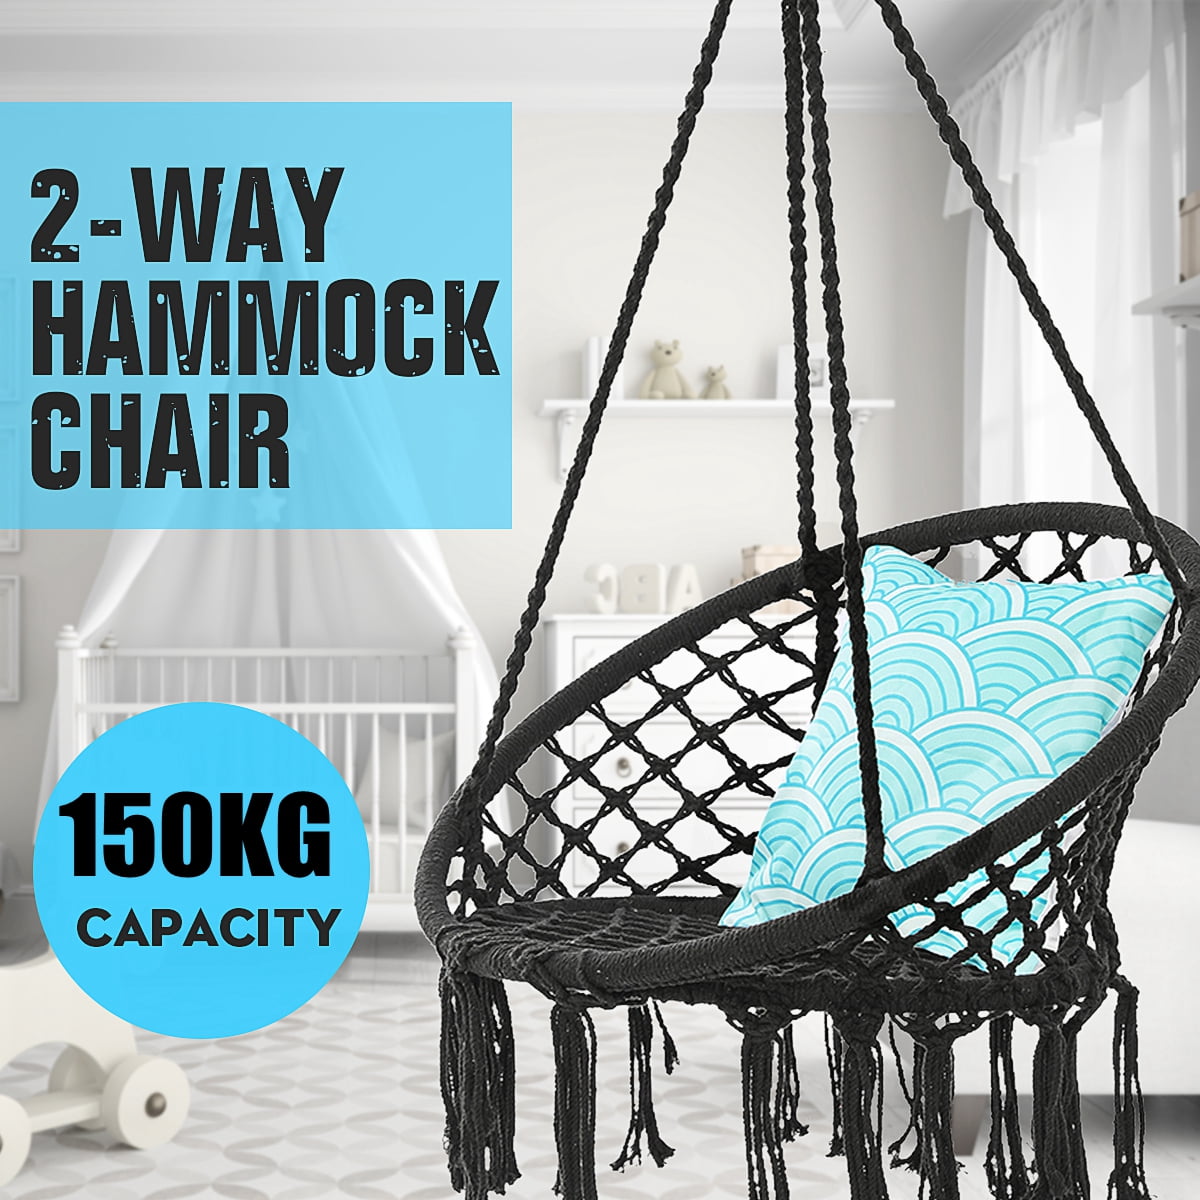 Nemore Swing Chair Cotton Hanging for Adults Rope Air/Sky Chair Hammock for Indoor Outdoor Garden Yard with Soft Cotton Rope 